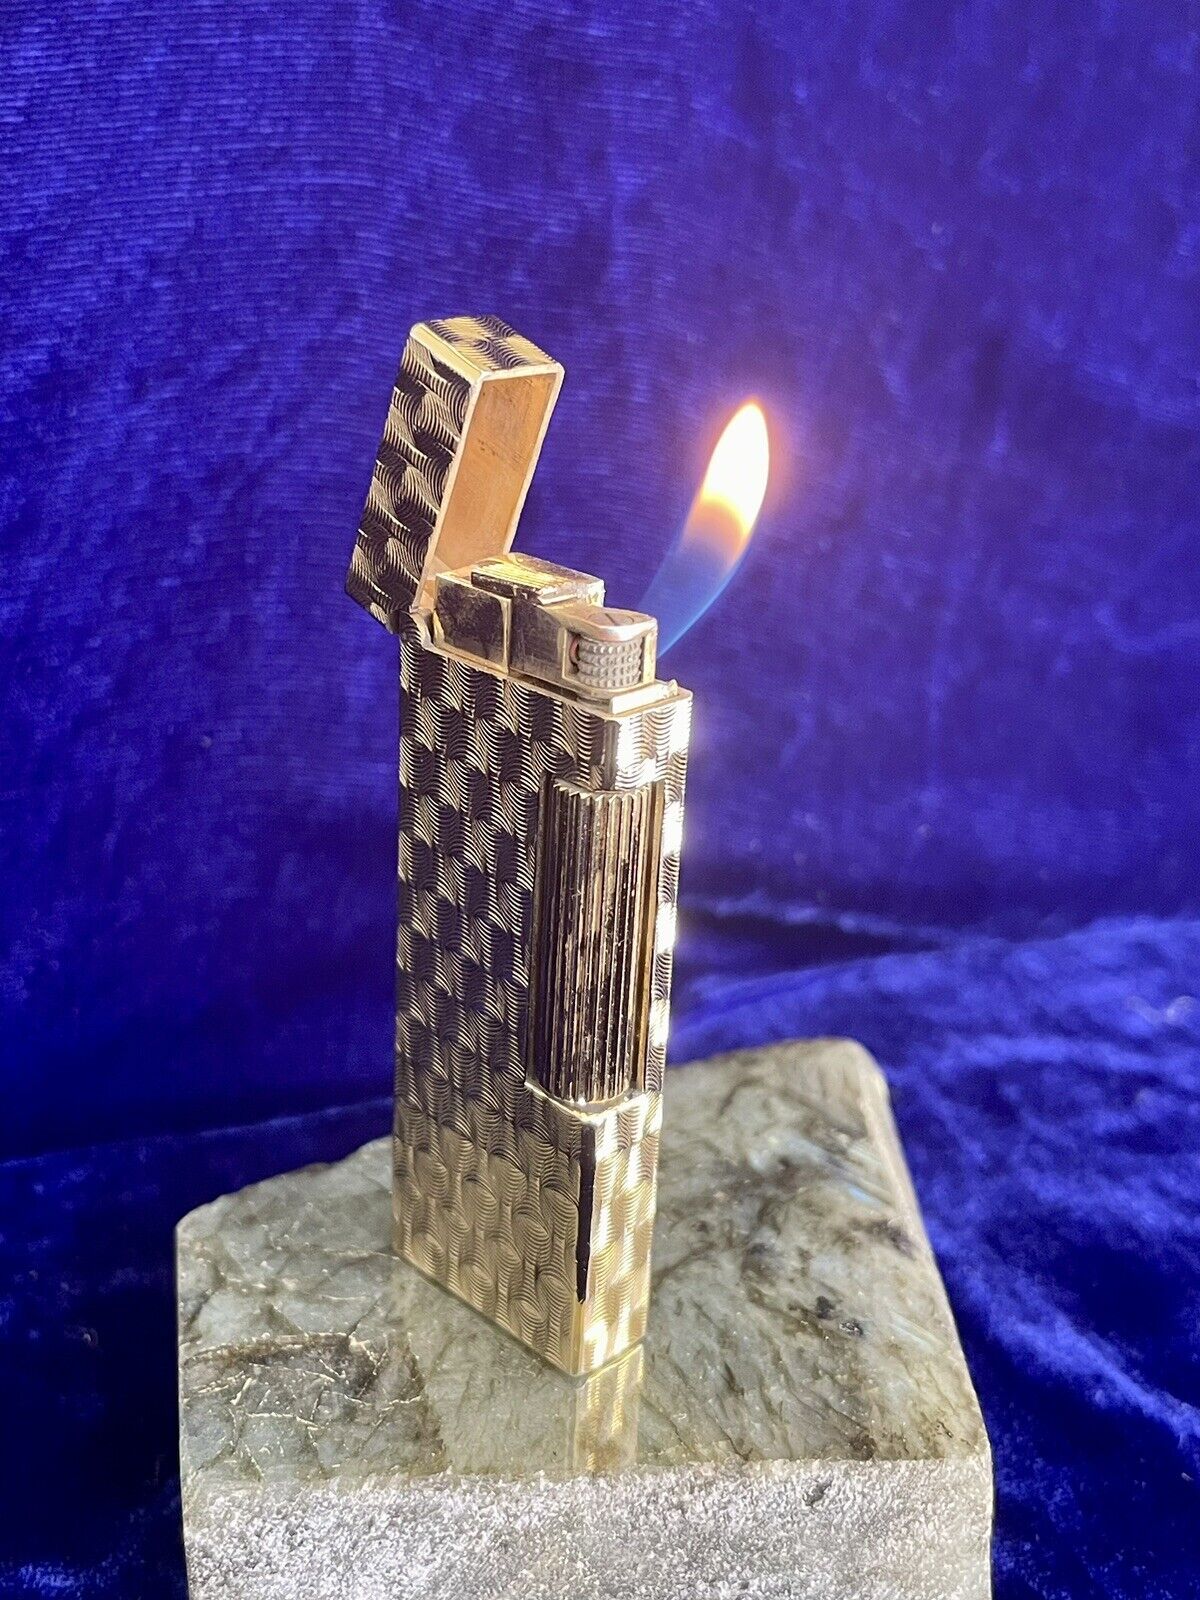 Rare Dunhill Lighter Gold Slime Dress Gold Mint Condition Works 1 Year Warranty